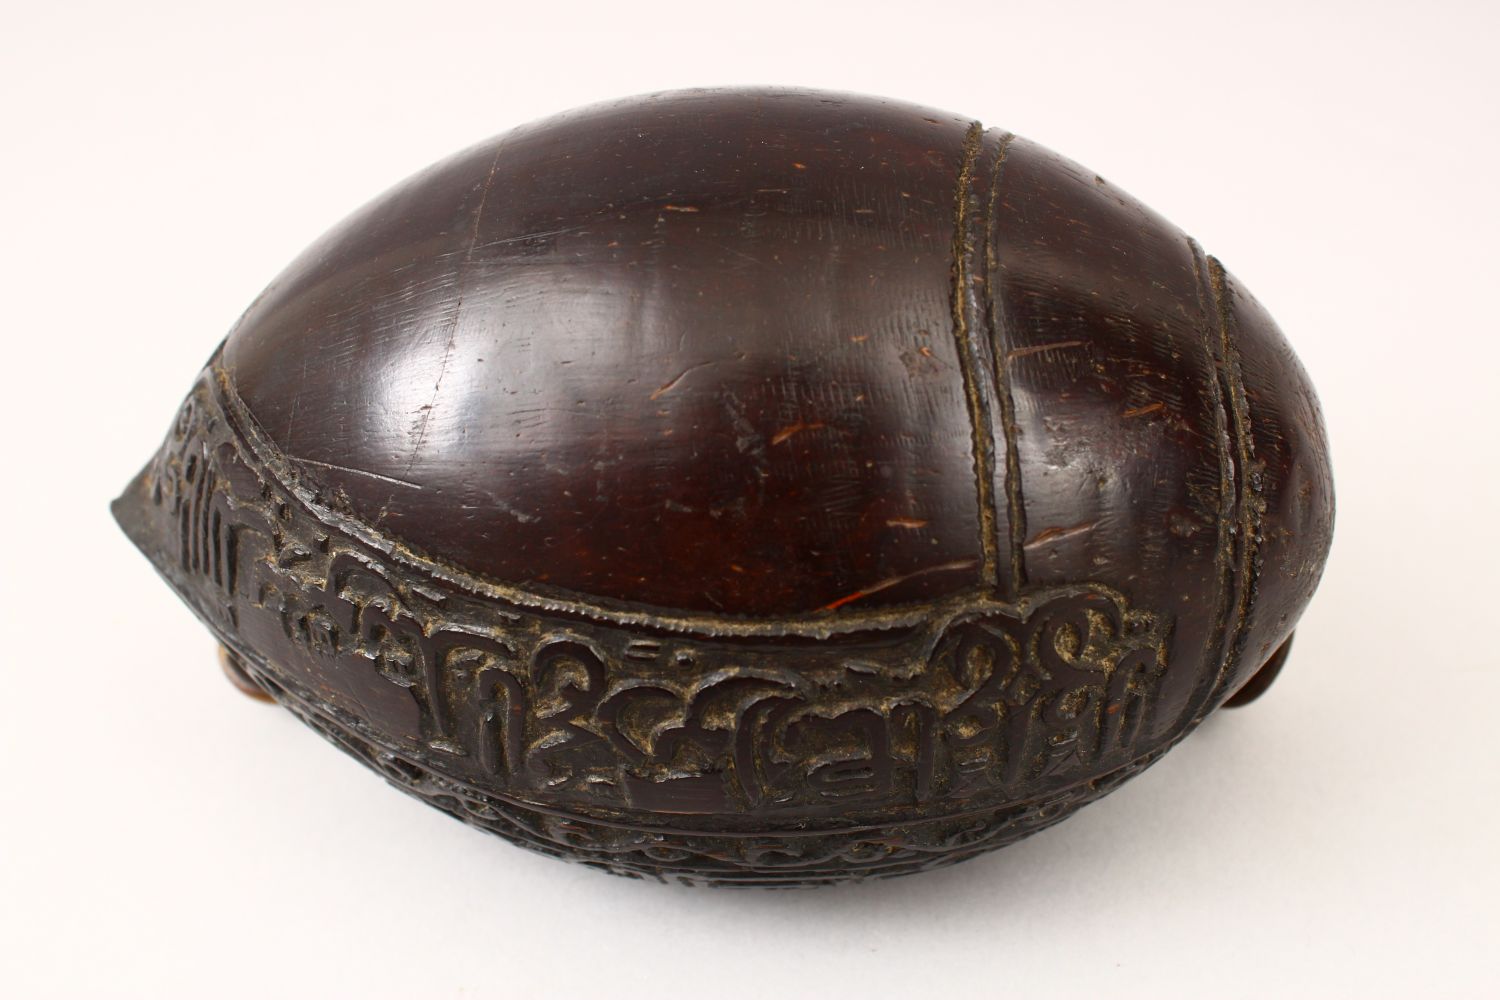 A GOOD 19TH CENTURY ISLAMIC COCO KASHKOOL, carved with Islamic calligraphy and scroll decoration - Image 13 of 14